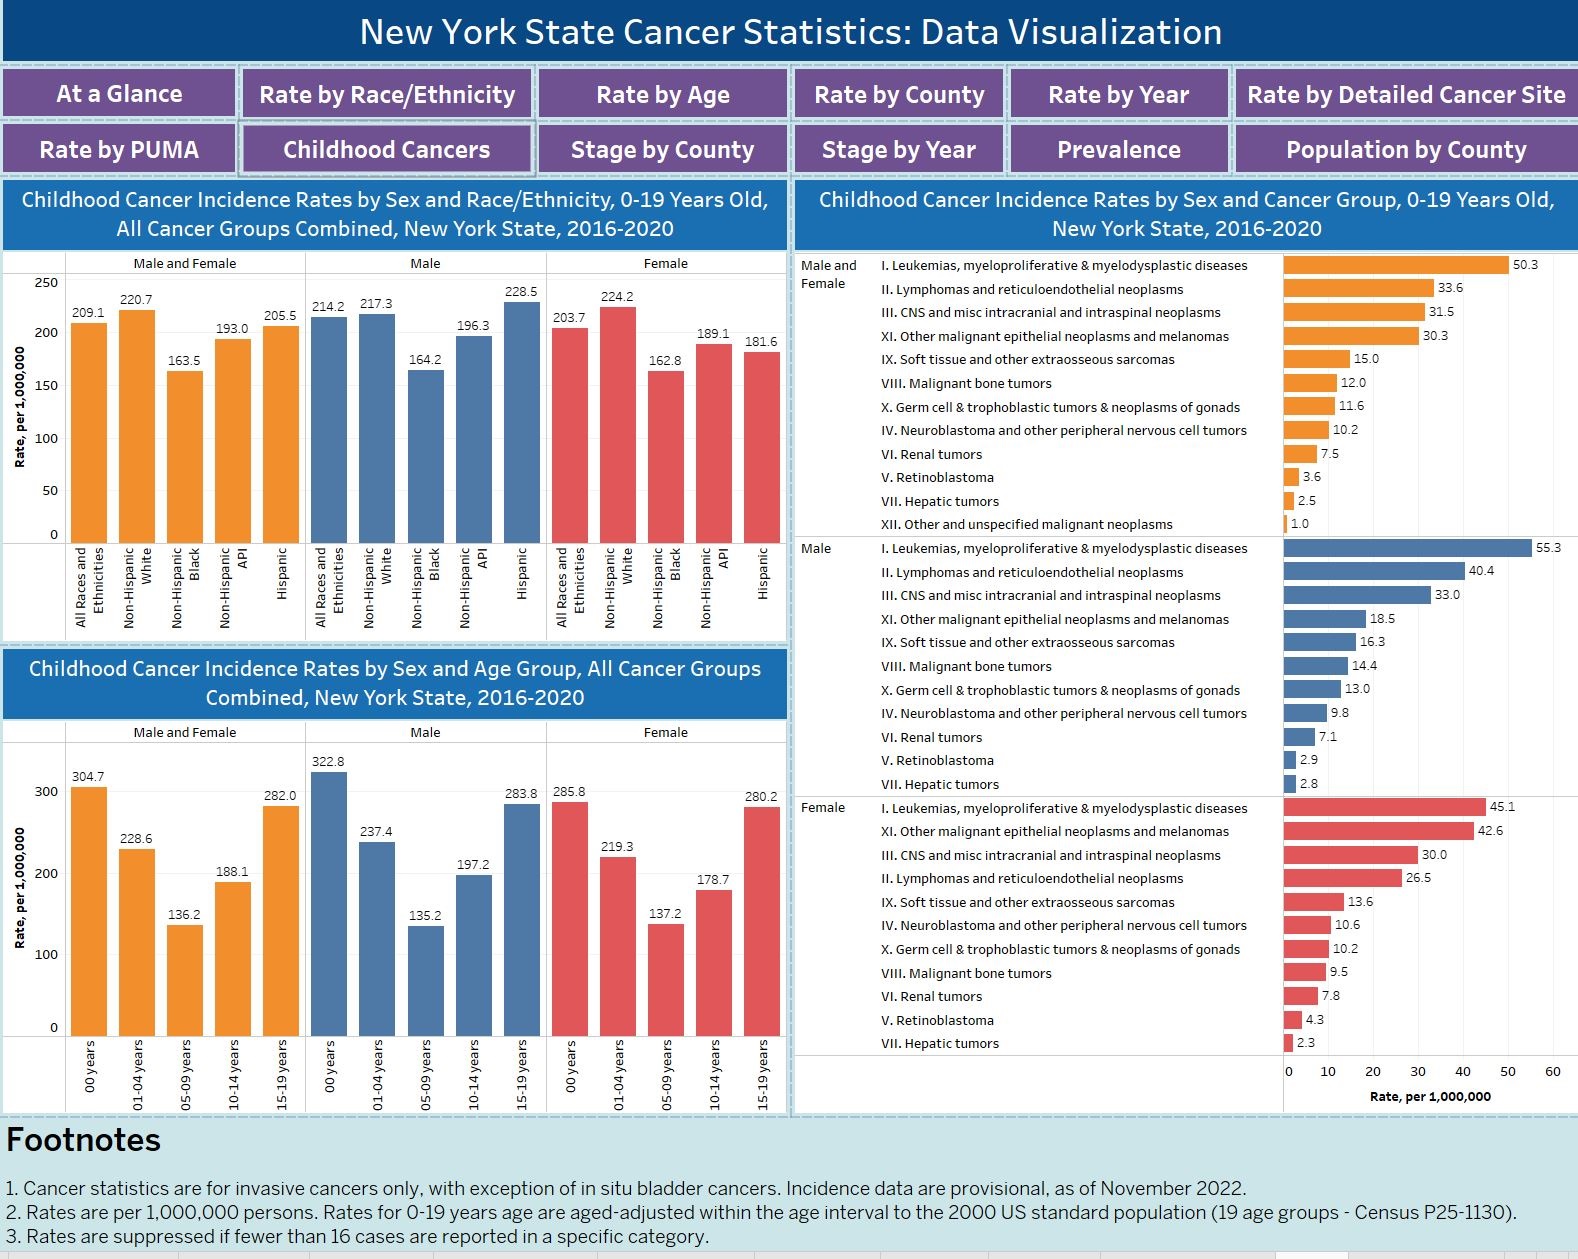 Childhood Cancer Incidence Rates in New York State